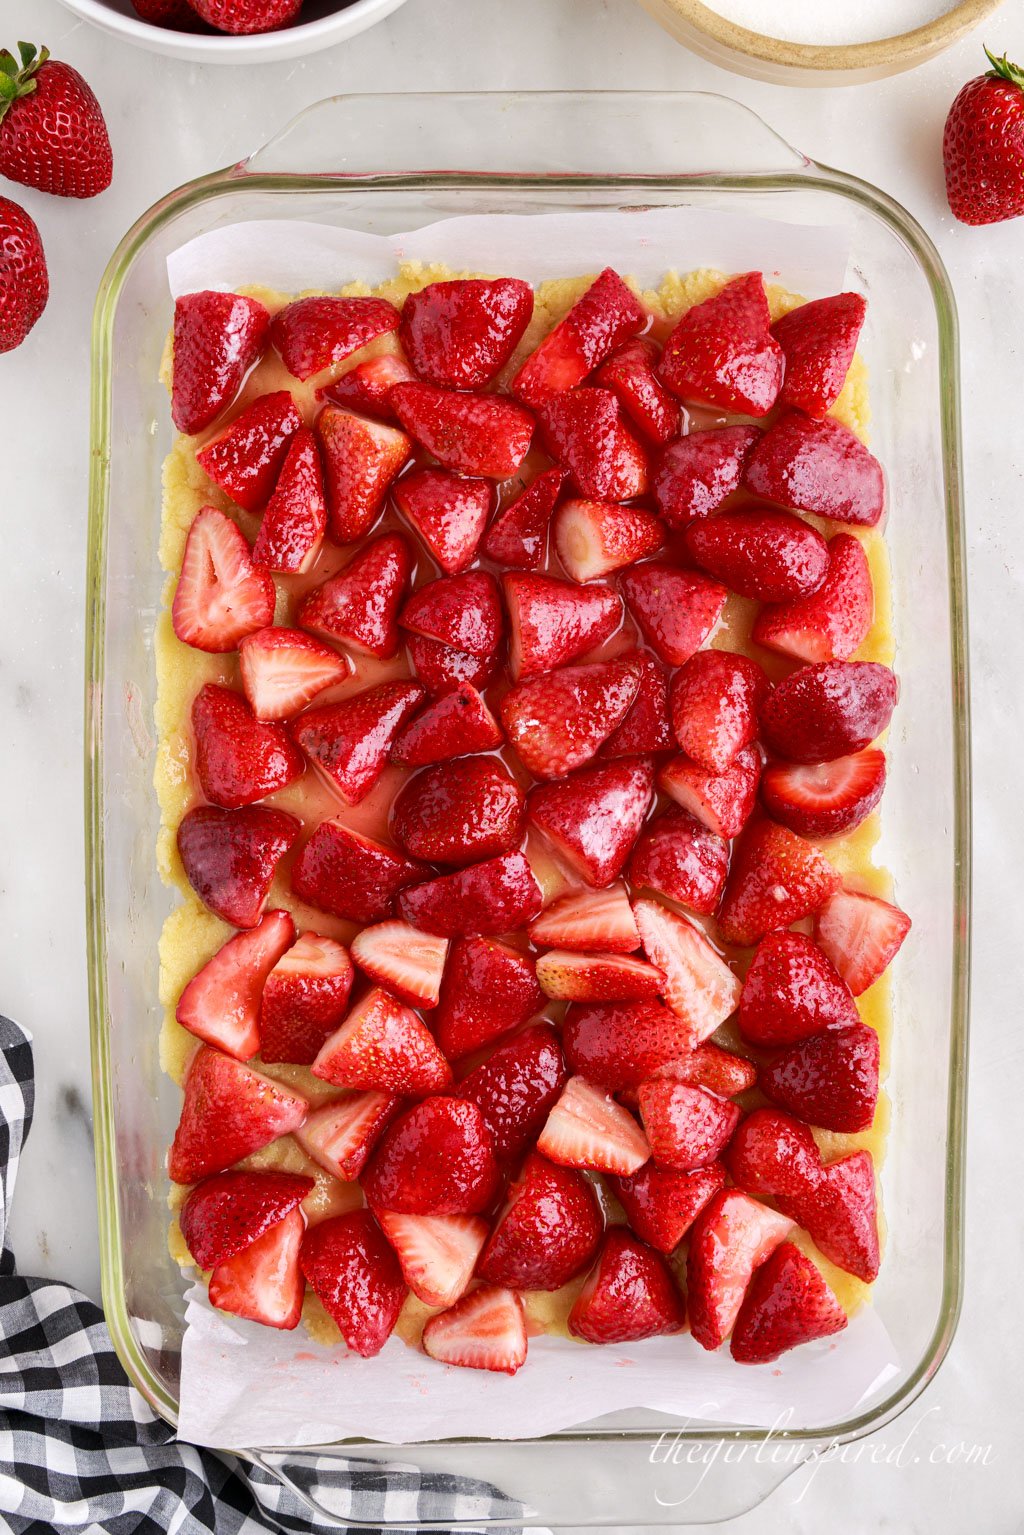 strawberry filling layer on top of shortbread crust in a glass baking dish